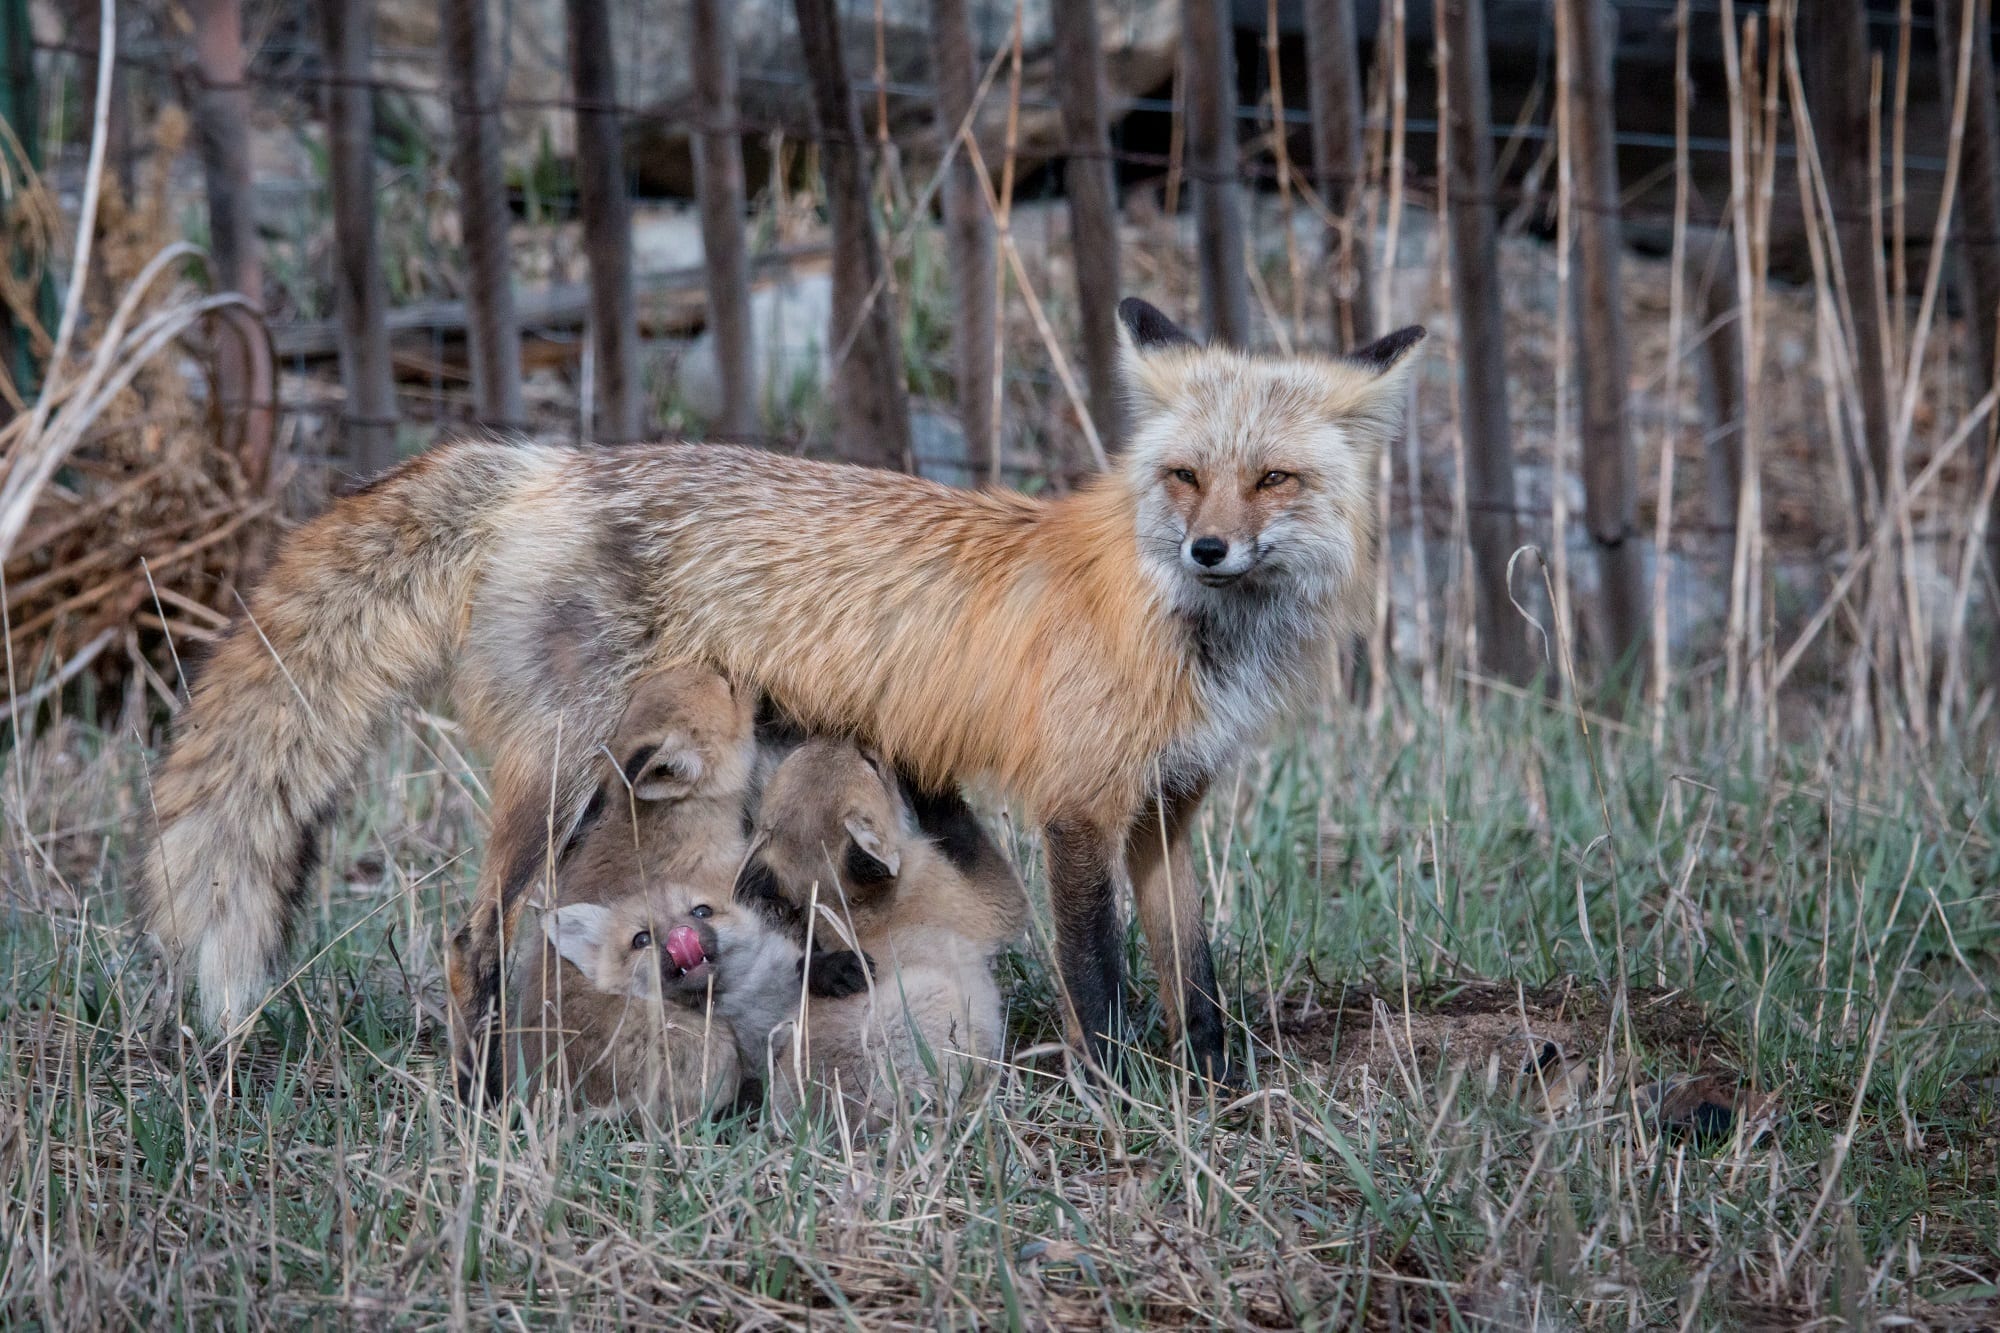 Red fox and babies in Breckenridge.